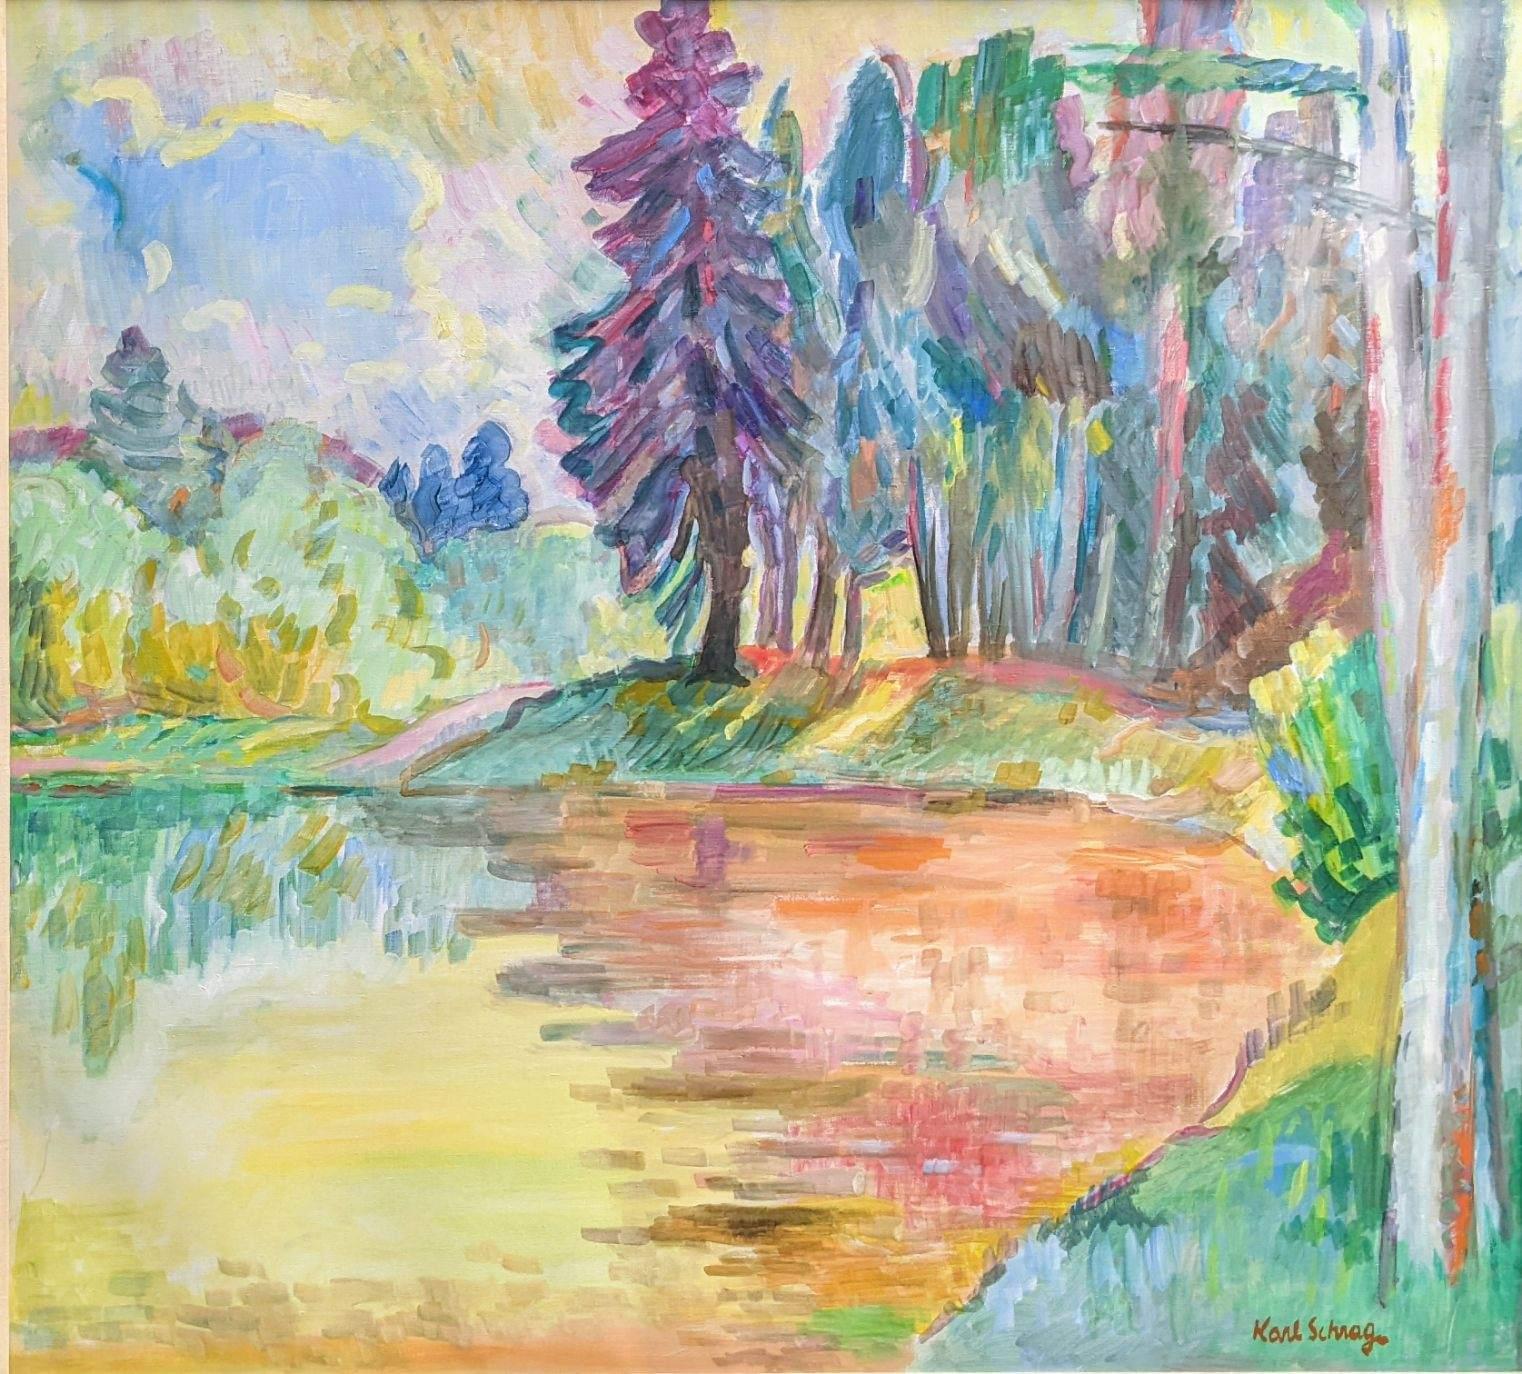 Karl Schrag (1912 - 1995)
Noon Silence By A Pond, circa 1959
Oil on canvas
46 x 42 inches
Signed lower right

Provenance:
Kraushaar Galleries, New York
Private Collection, Sag Harbor, New York (acquired from the above)

Karl Schrag, a German-born